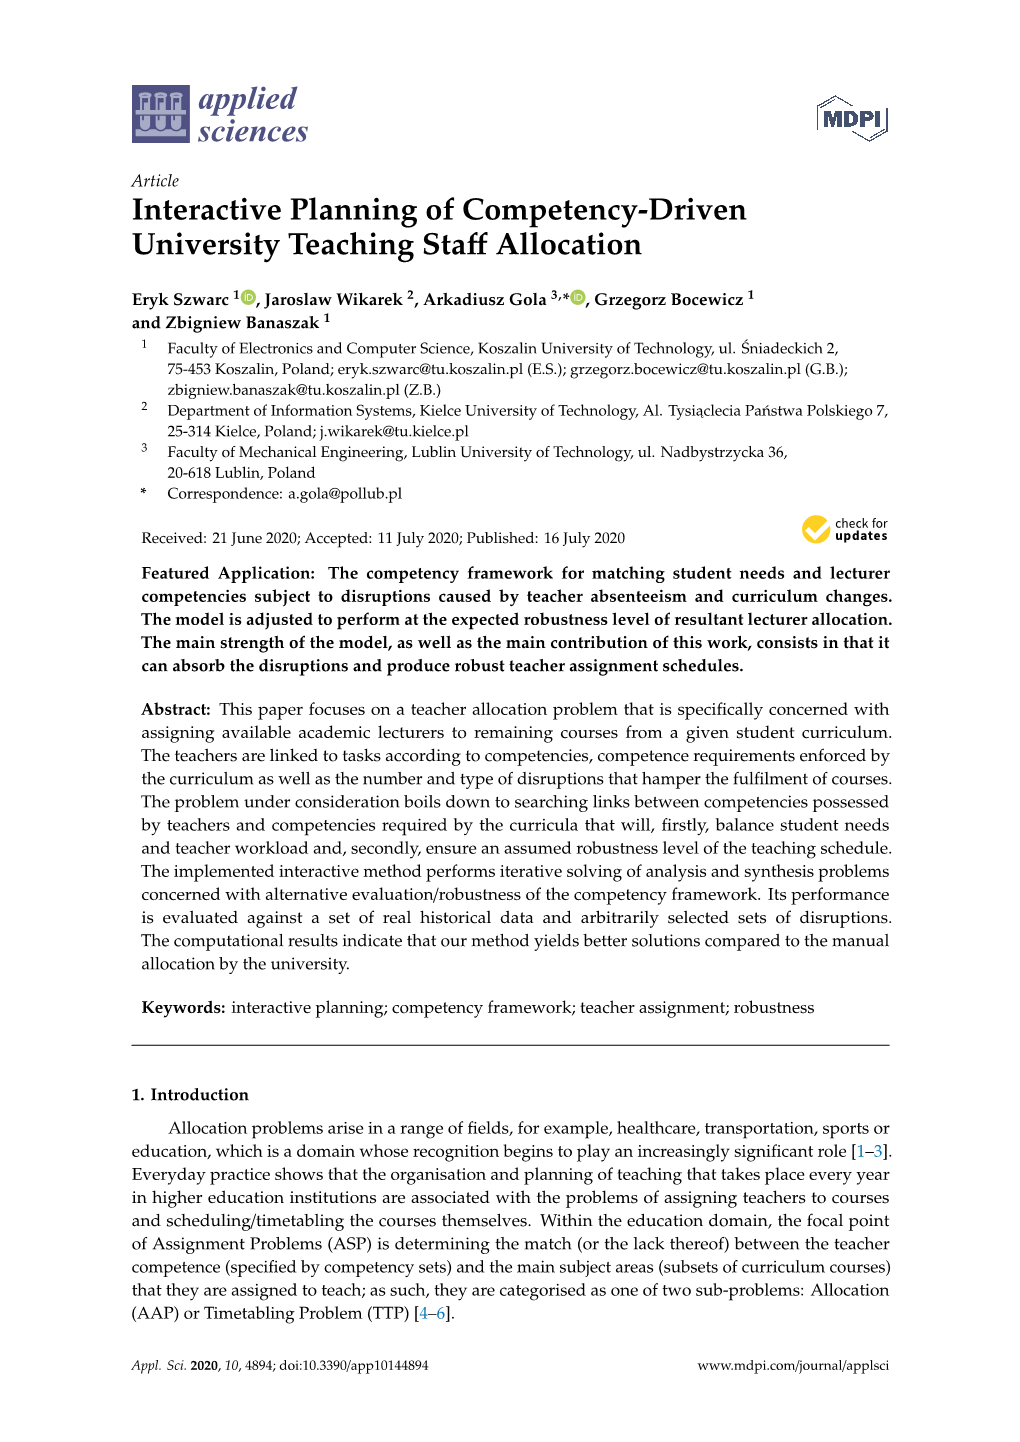 Interactive Planning of Competency-Driven University Teaching Staff Allocation